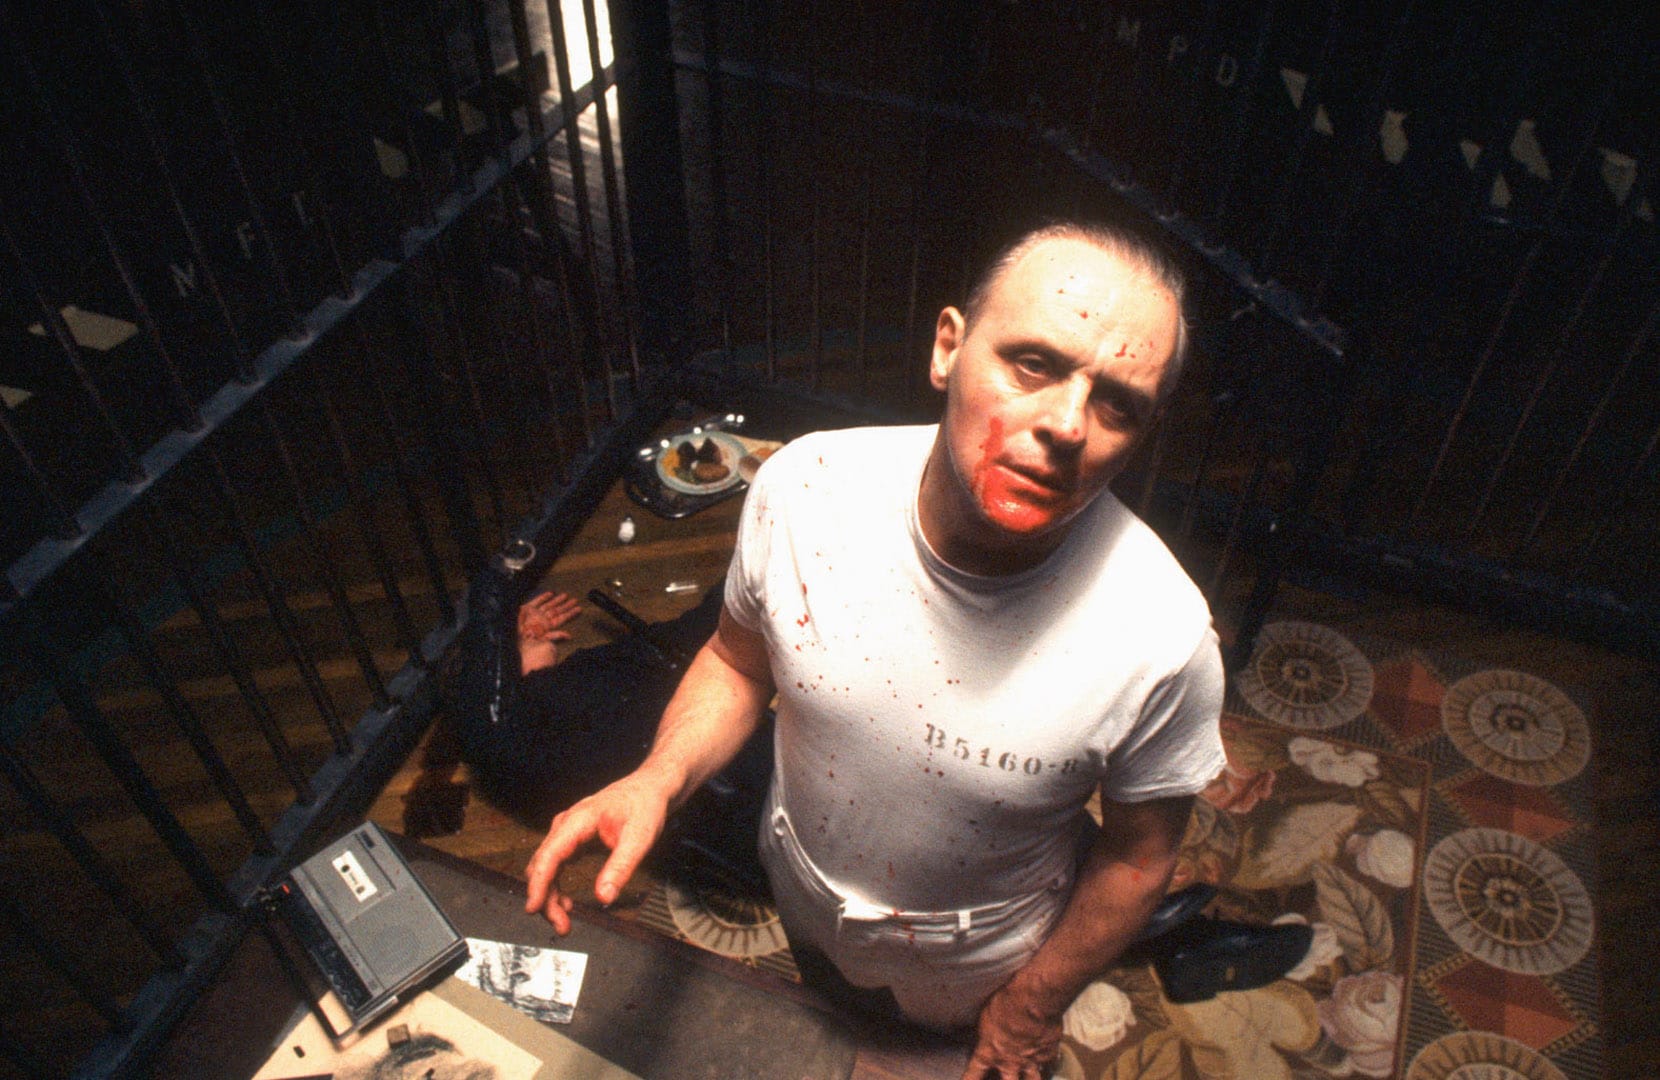 THE SILENCE OF THE LAMBS, Anthony Hopkins, 1991